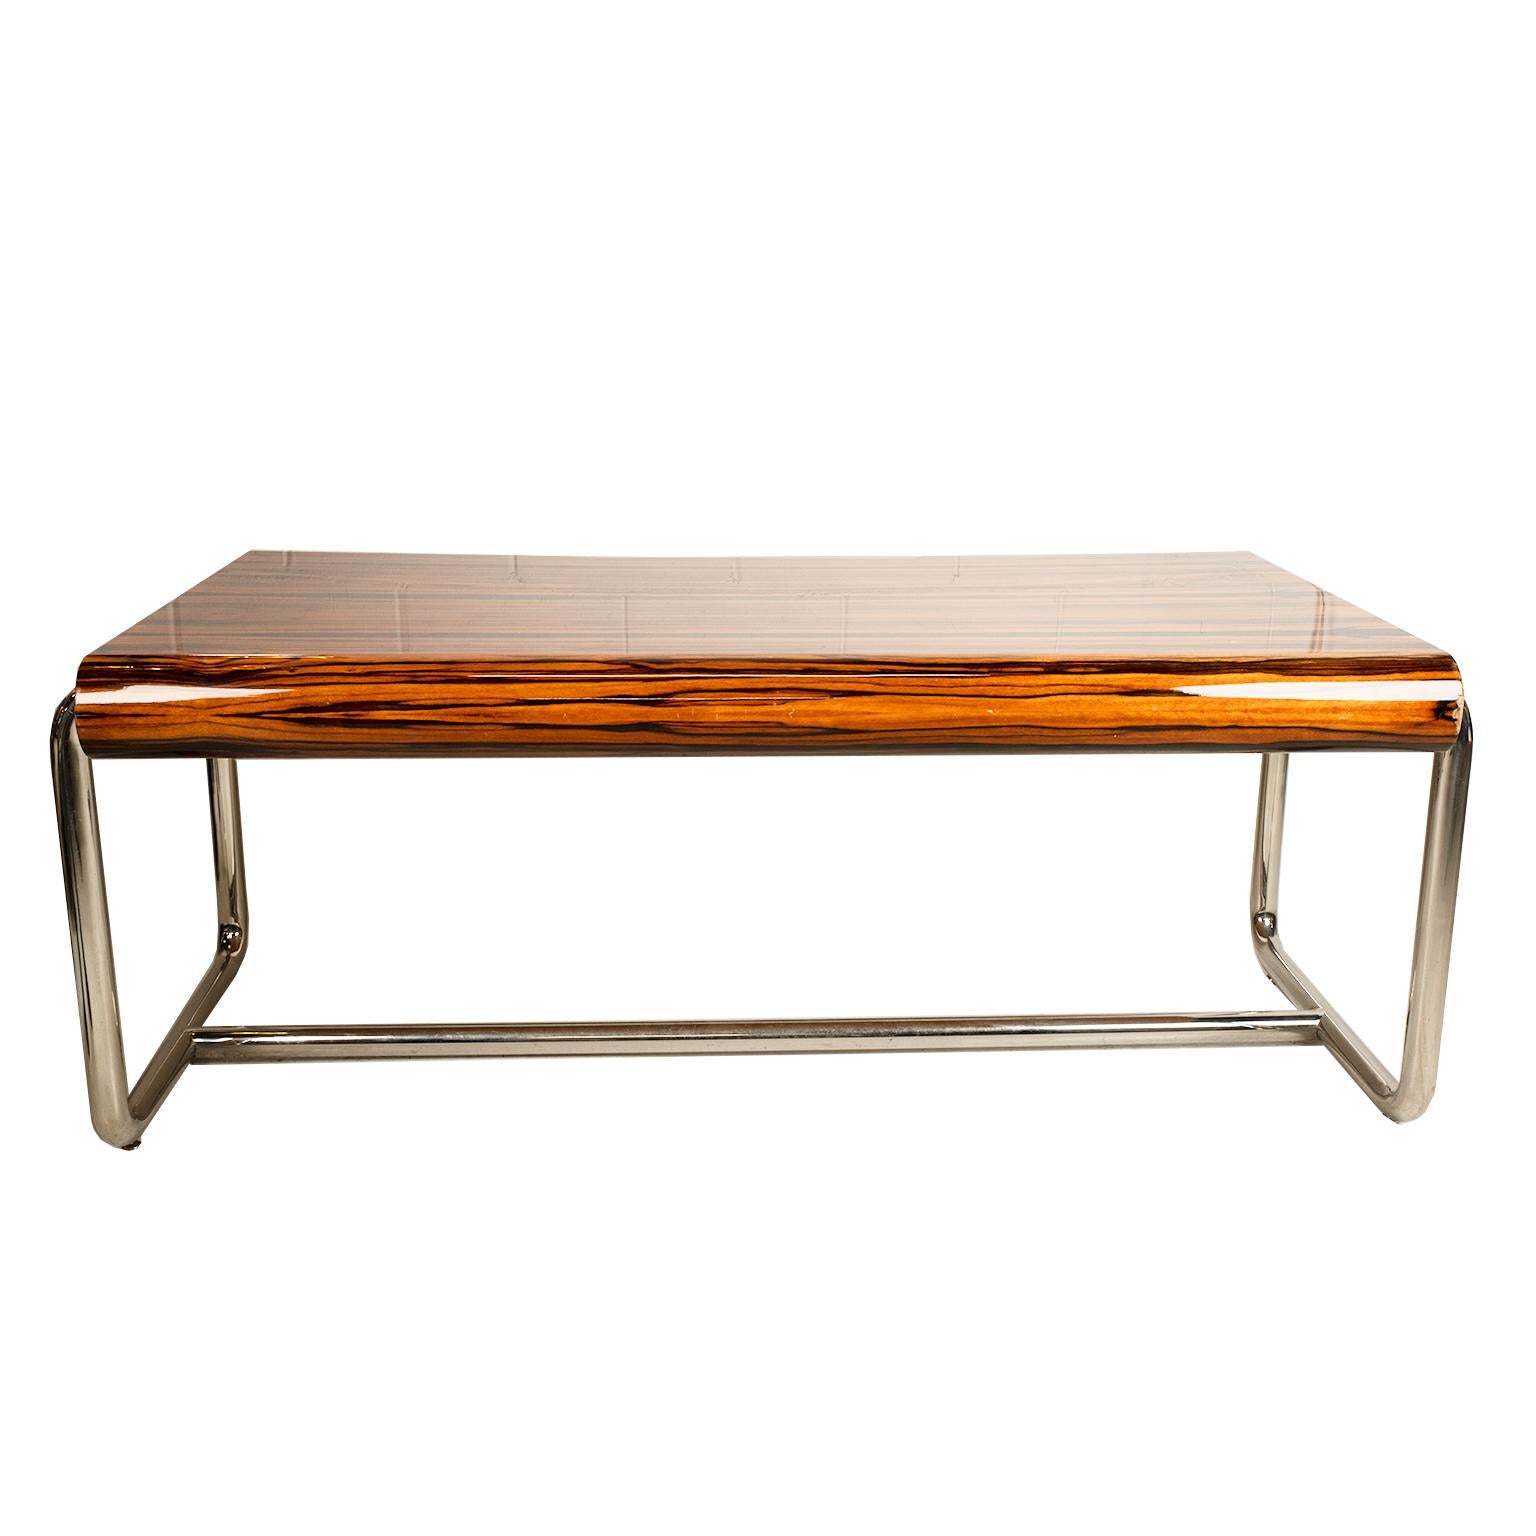 Leon Rosen Lacquered Executive Desk For Pace, USA For Sale 1